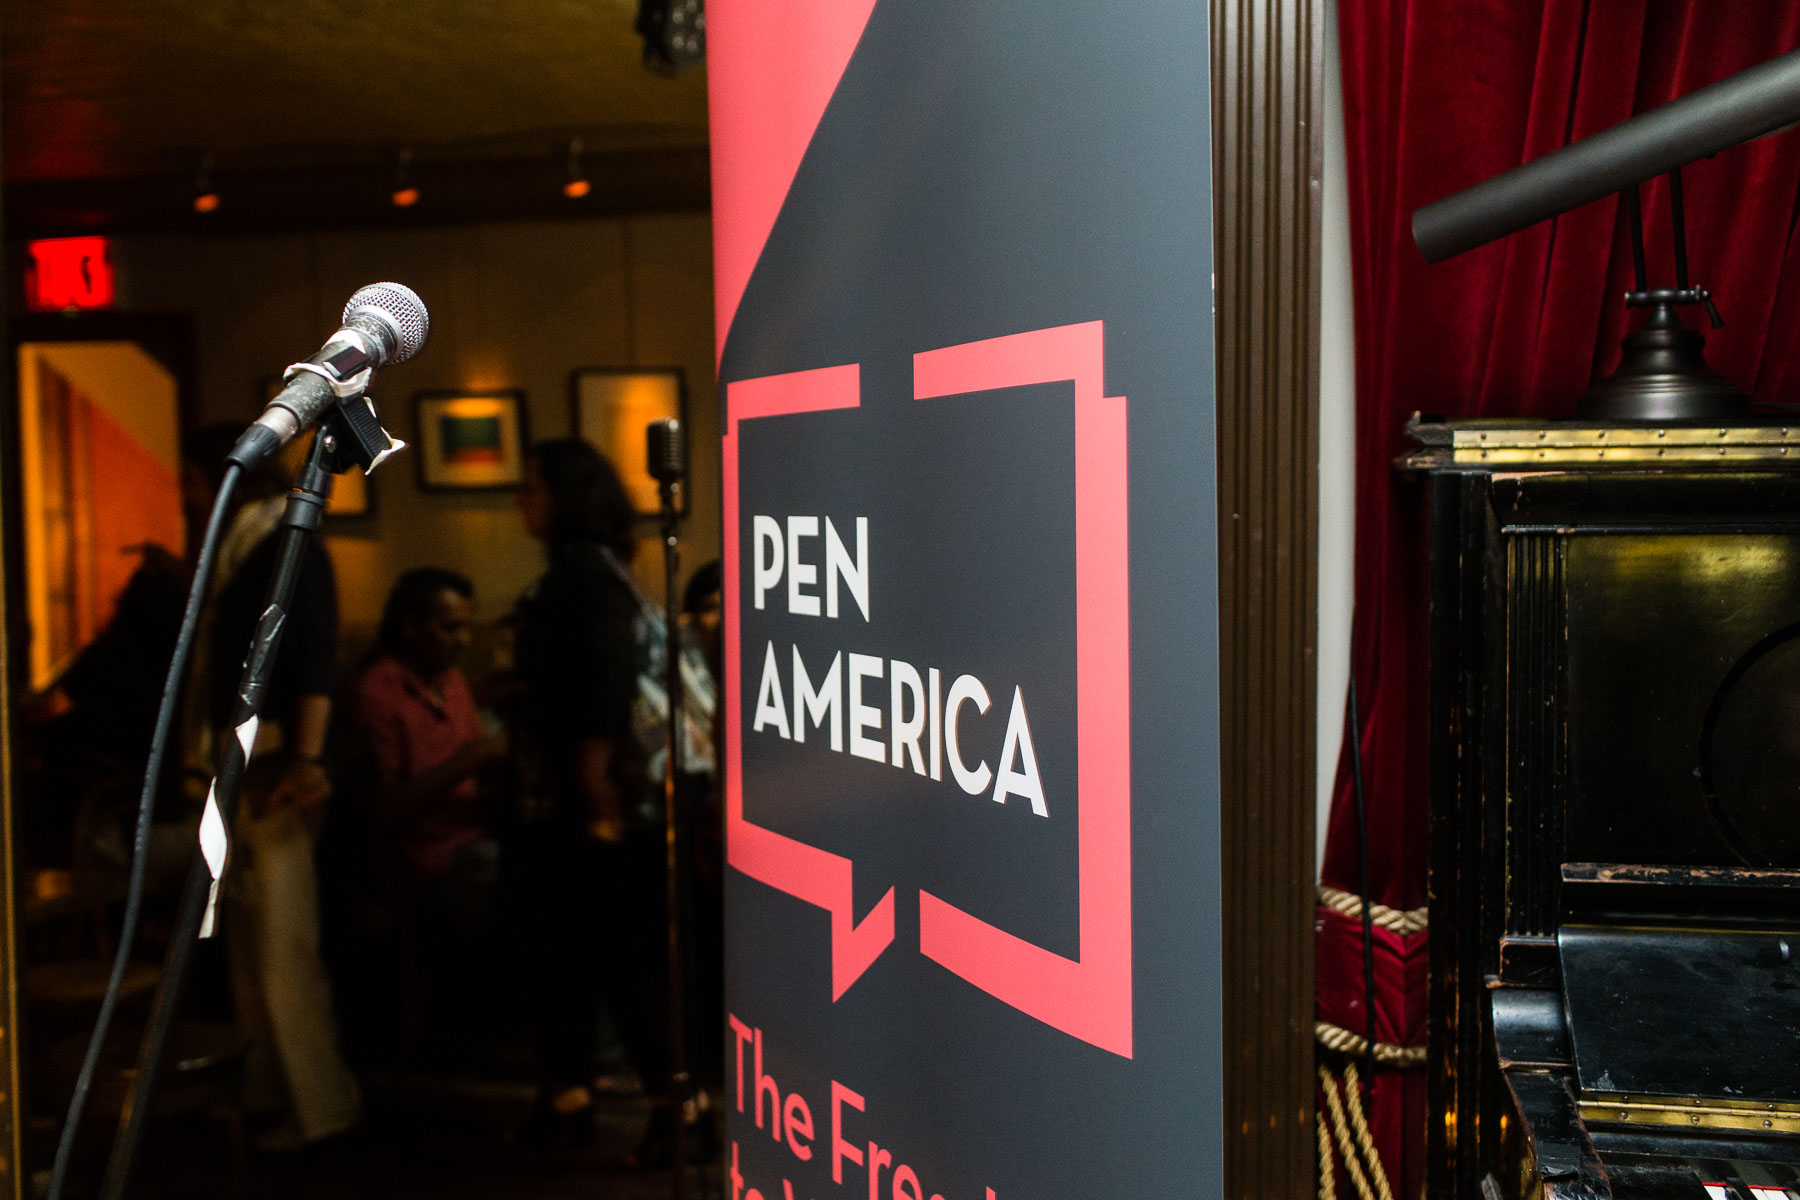 pen america banner and microphone